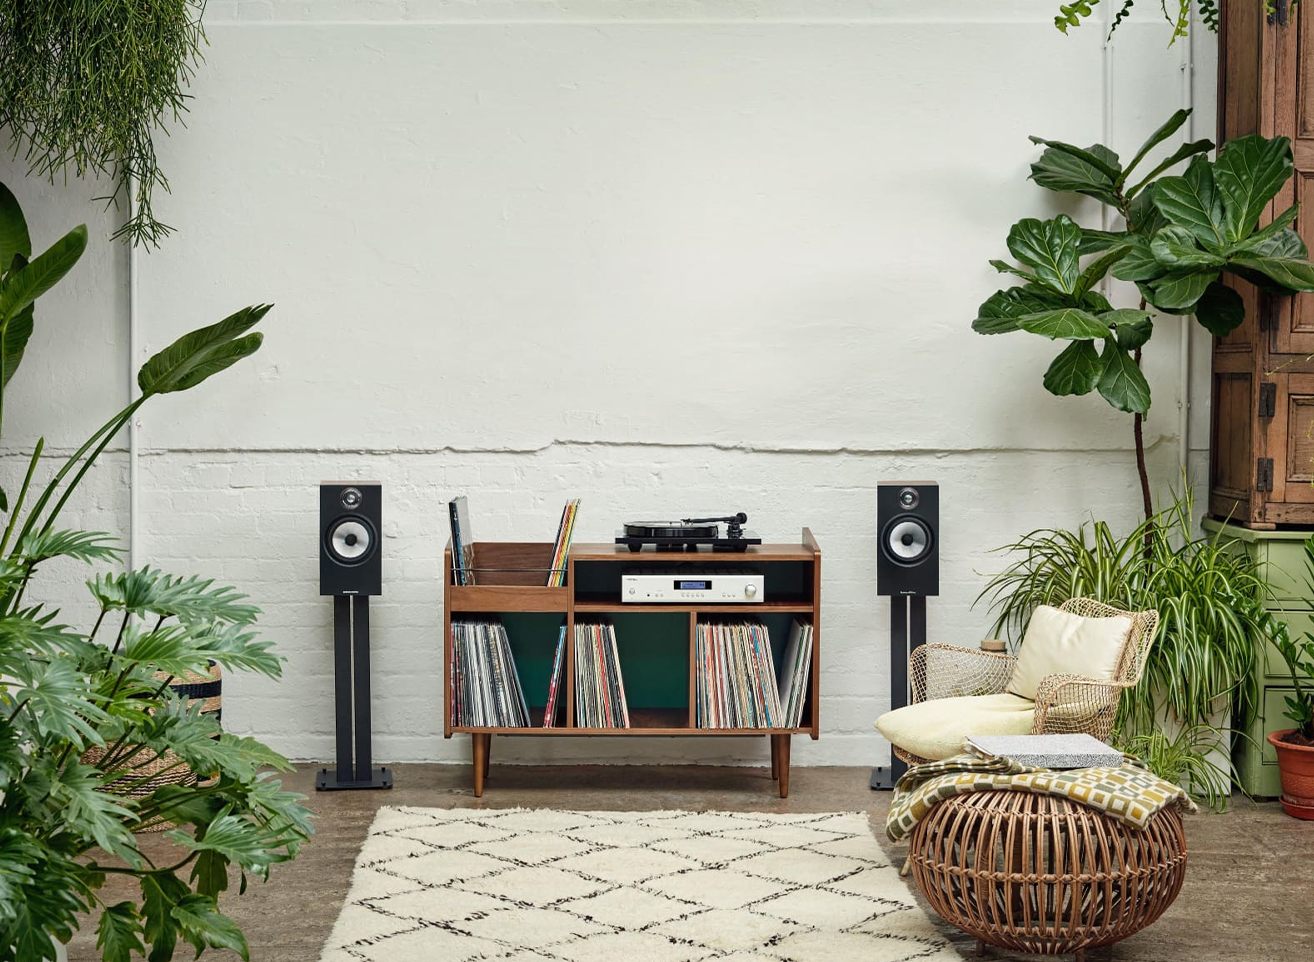 Bowers & Wilkins 600 Series Anniversary Edition